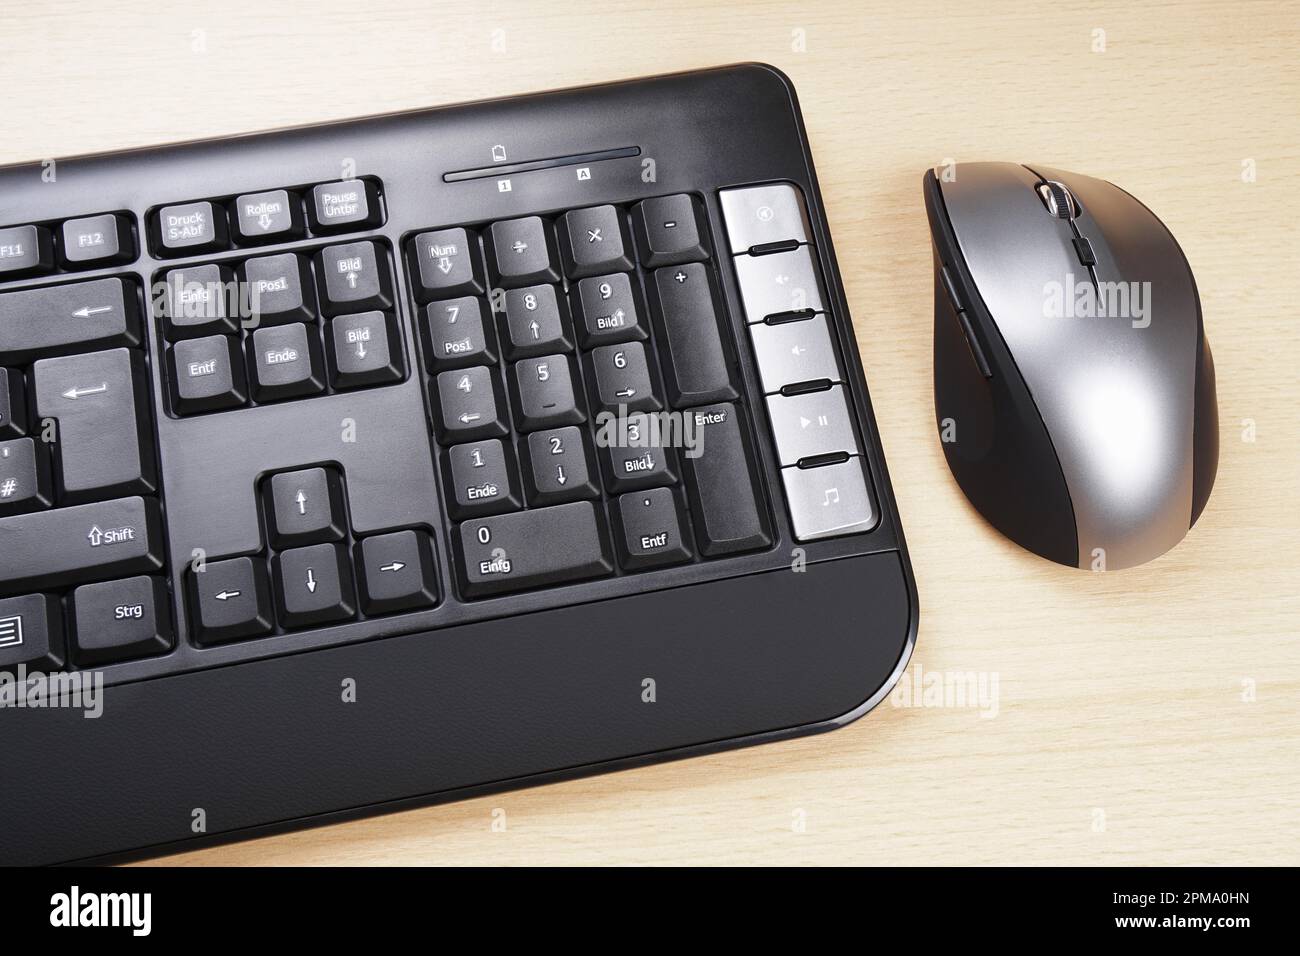 multimedia computer keyboard with german layoutand 5 button mouse Stock Photo